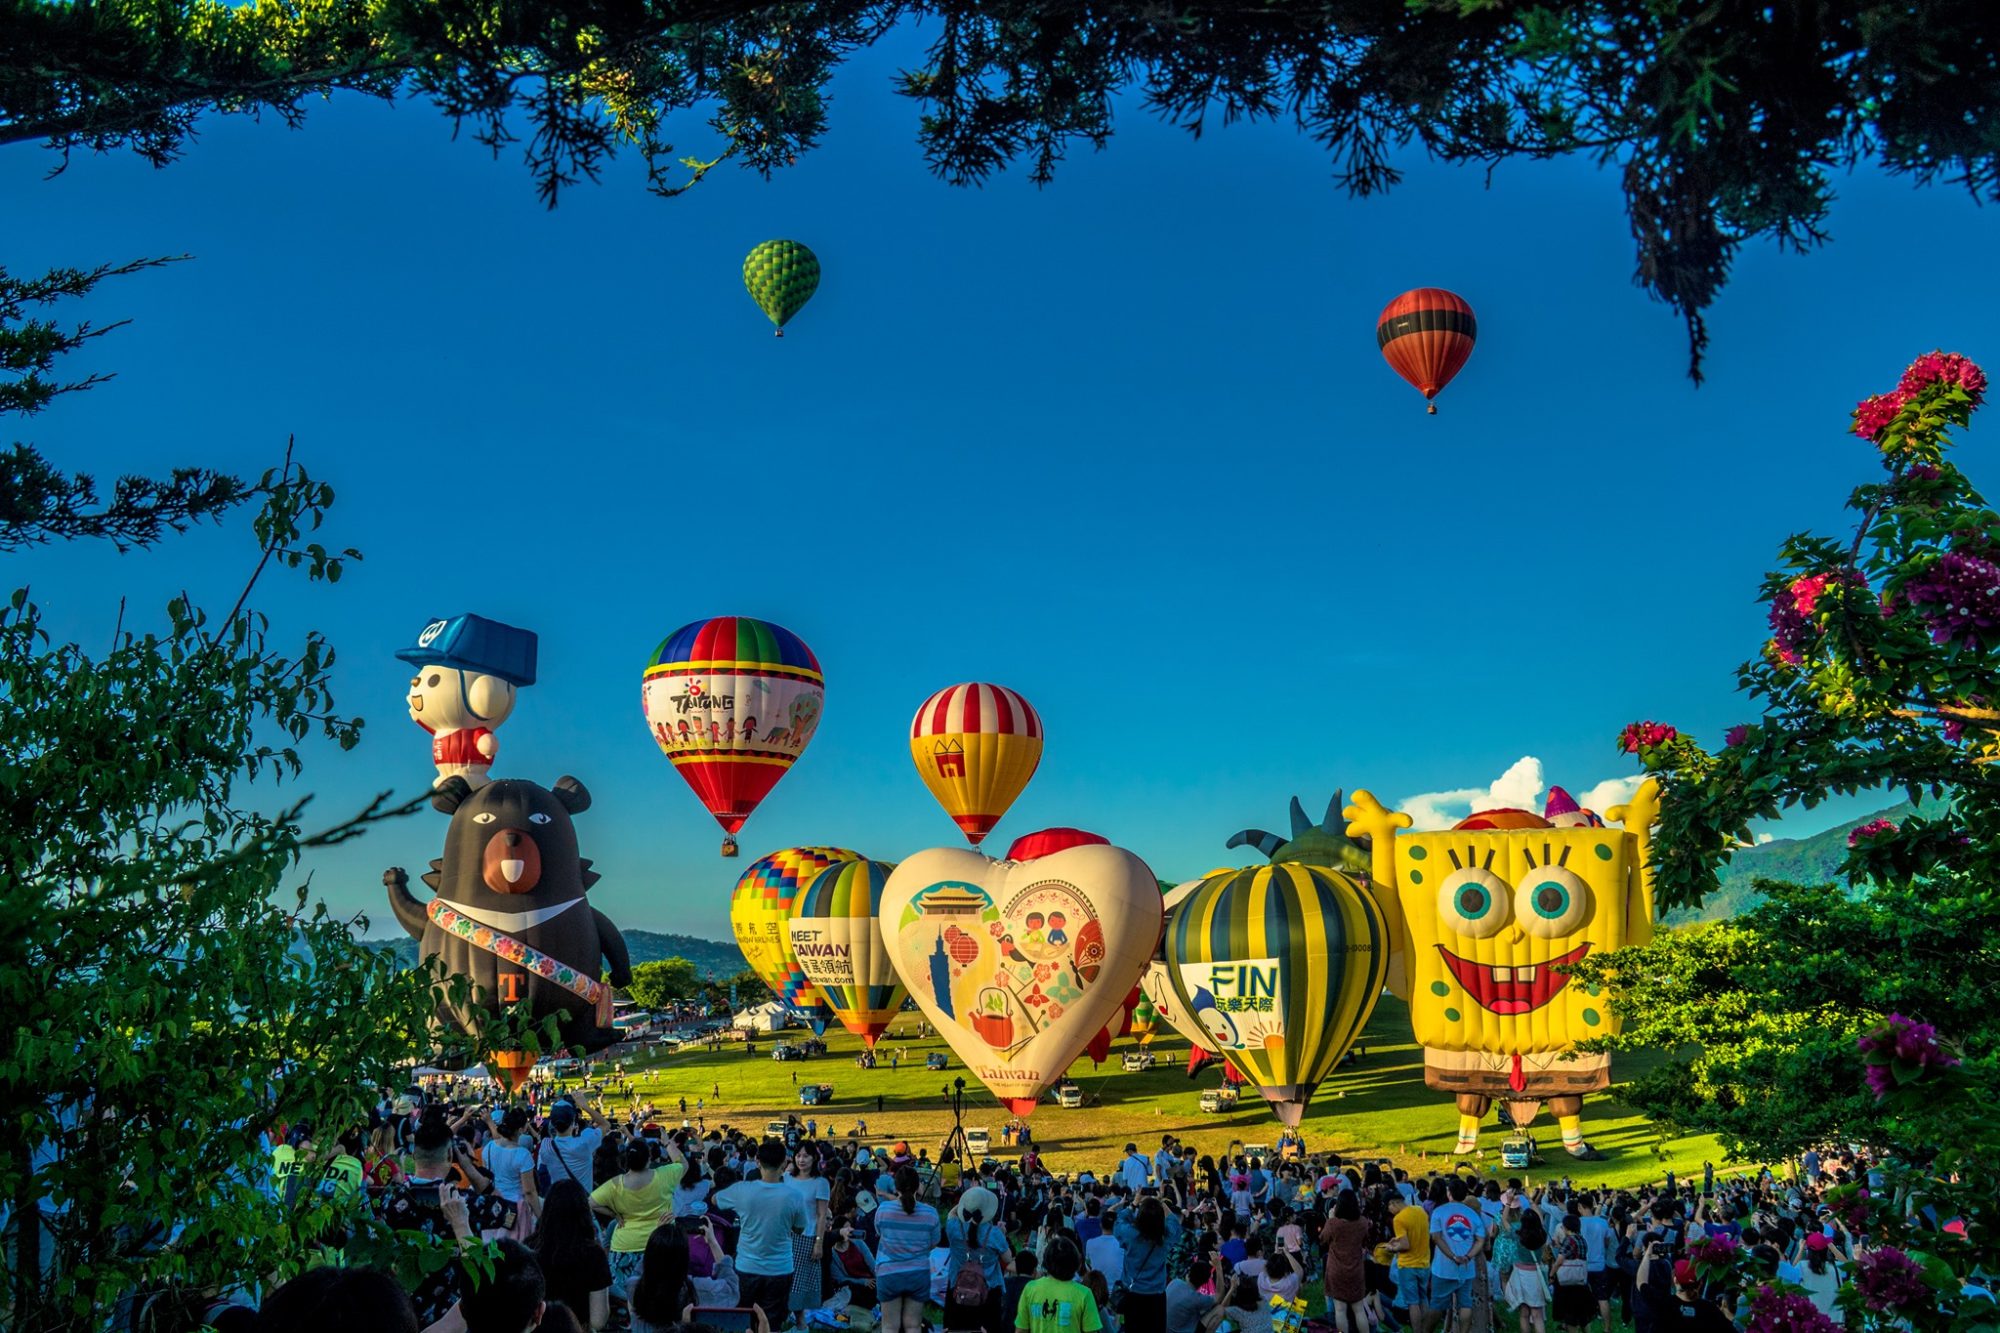 Debuting the world’s only balloon festival this year in Taiwan.